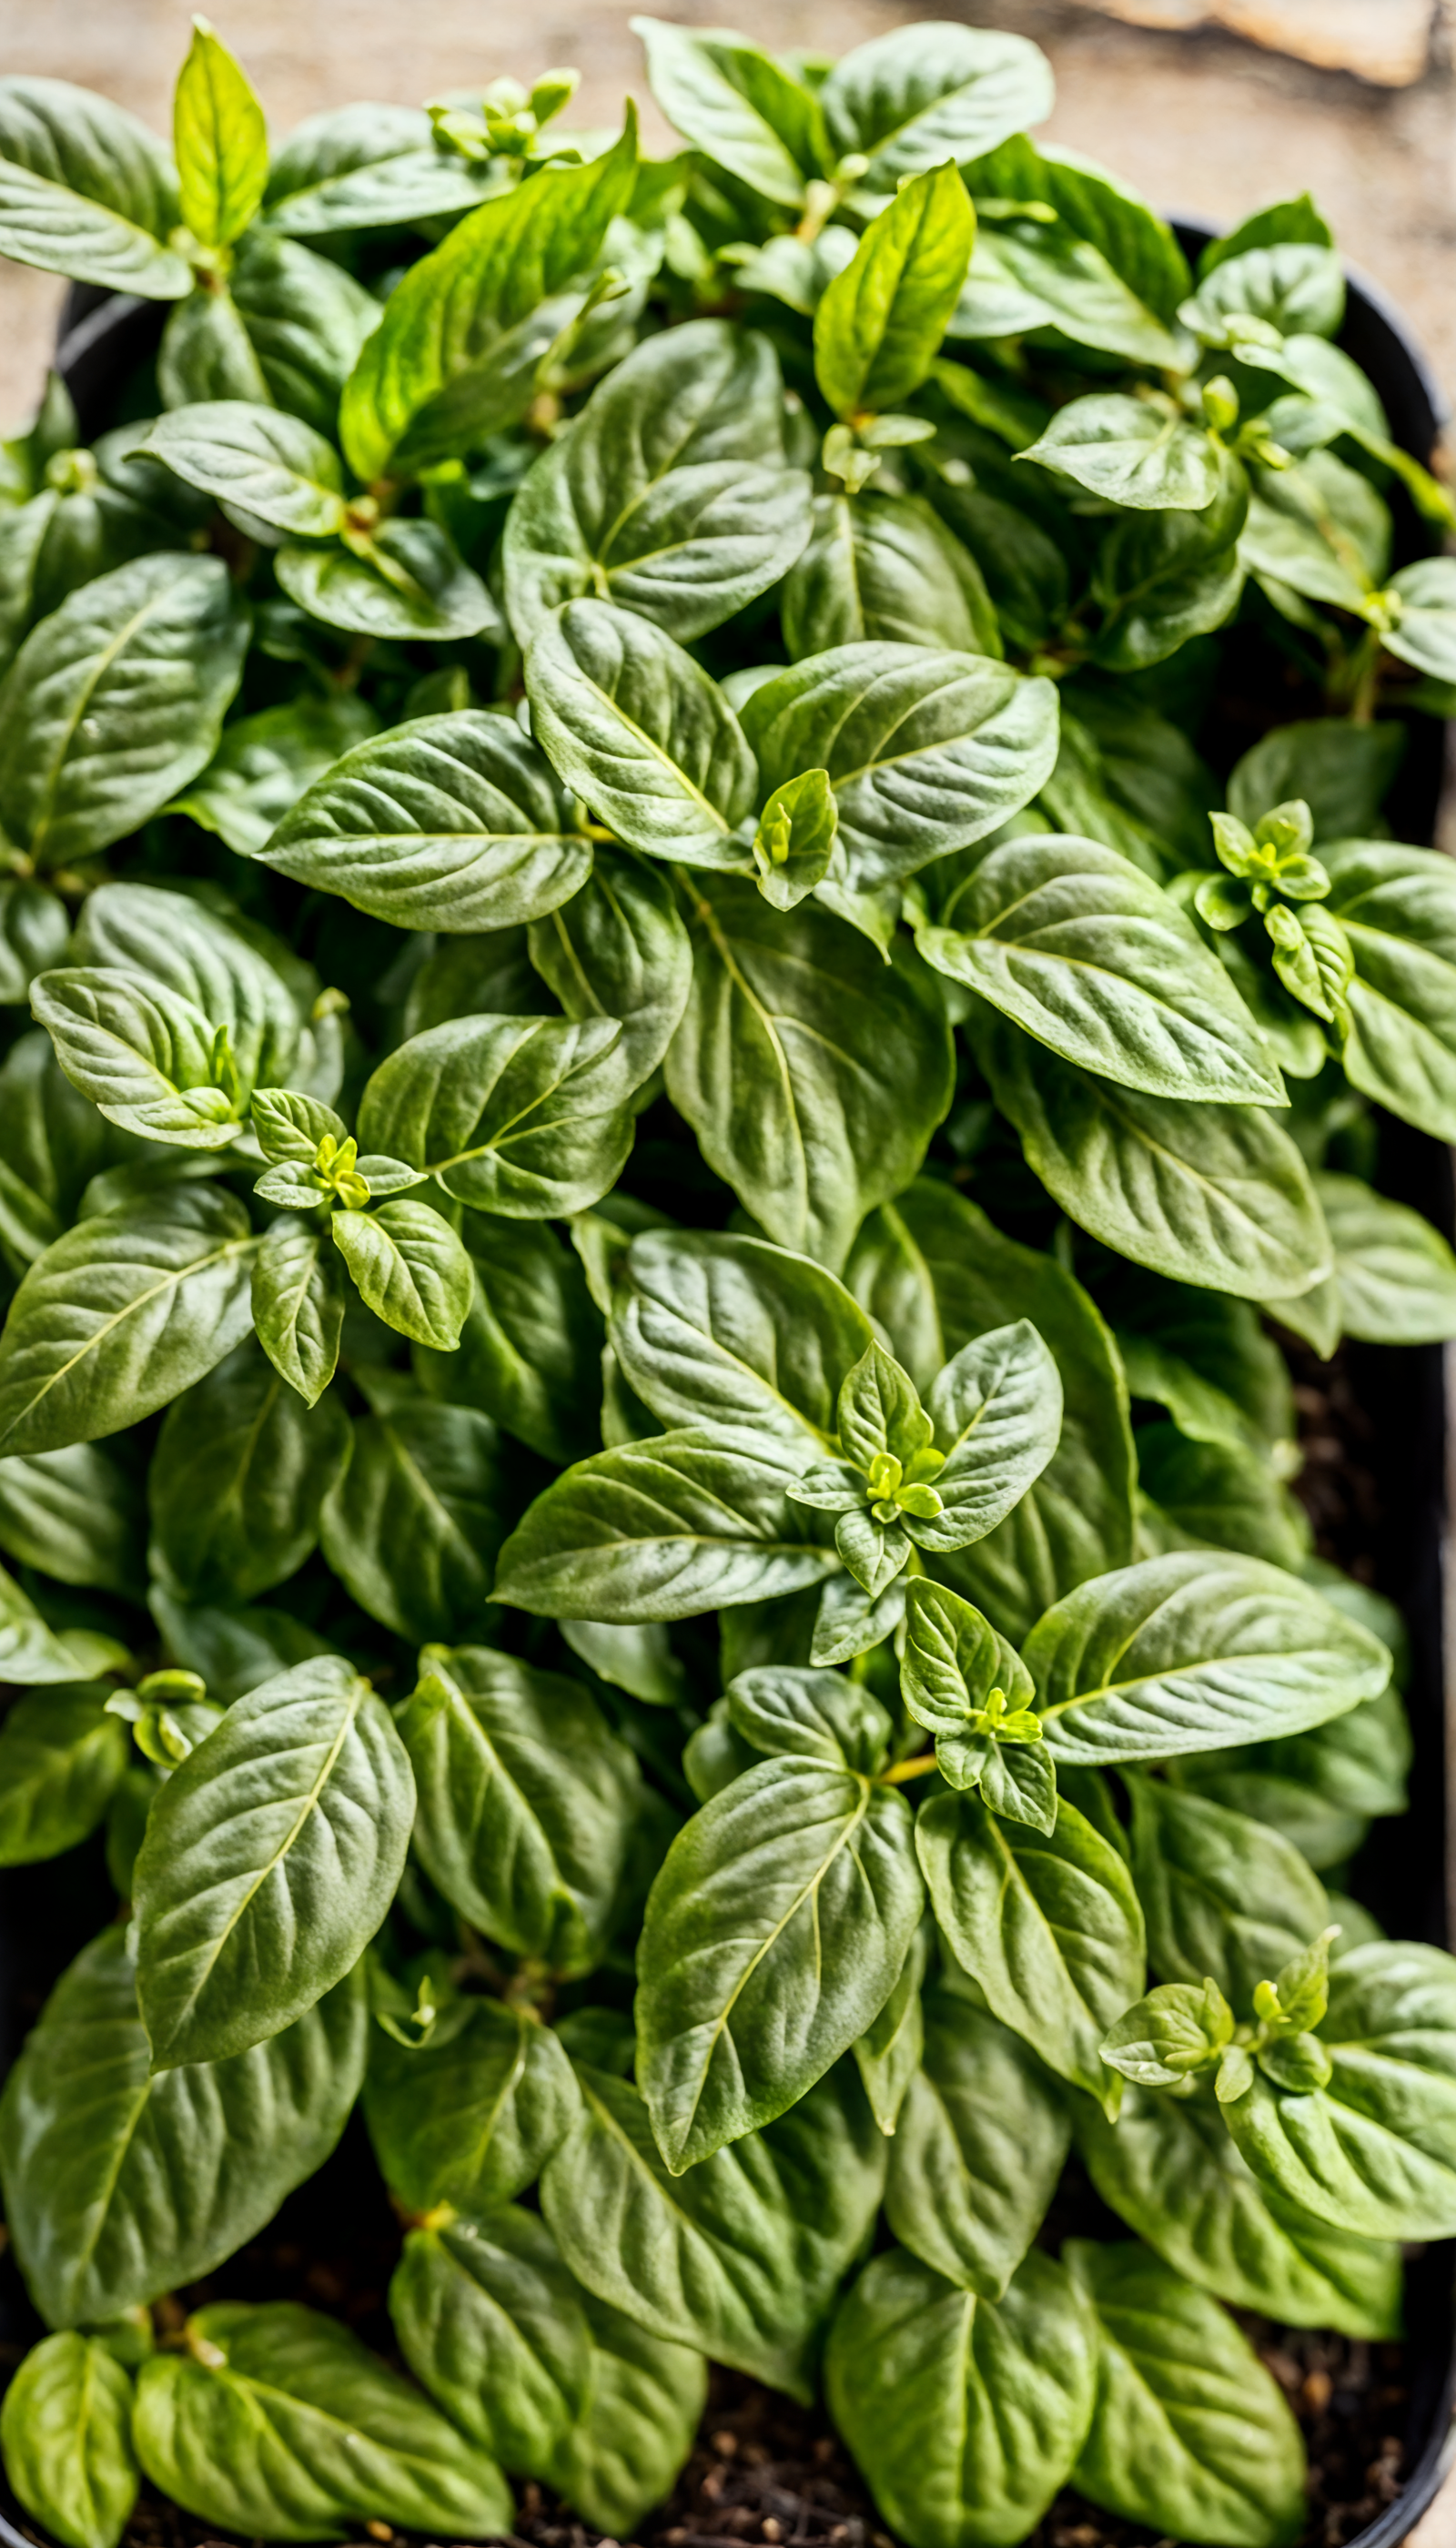 Potted Ocimum basilicum (basil) with vibrant green leaves, clear lighting, against a dark background.